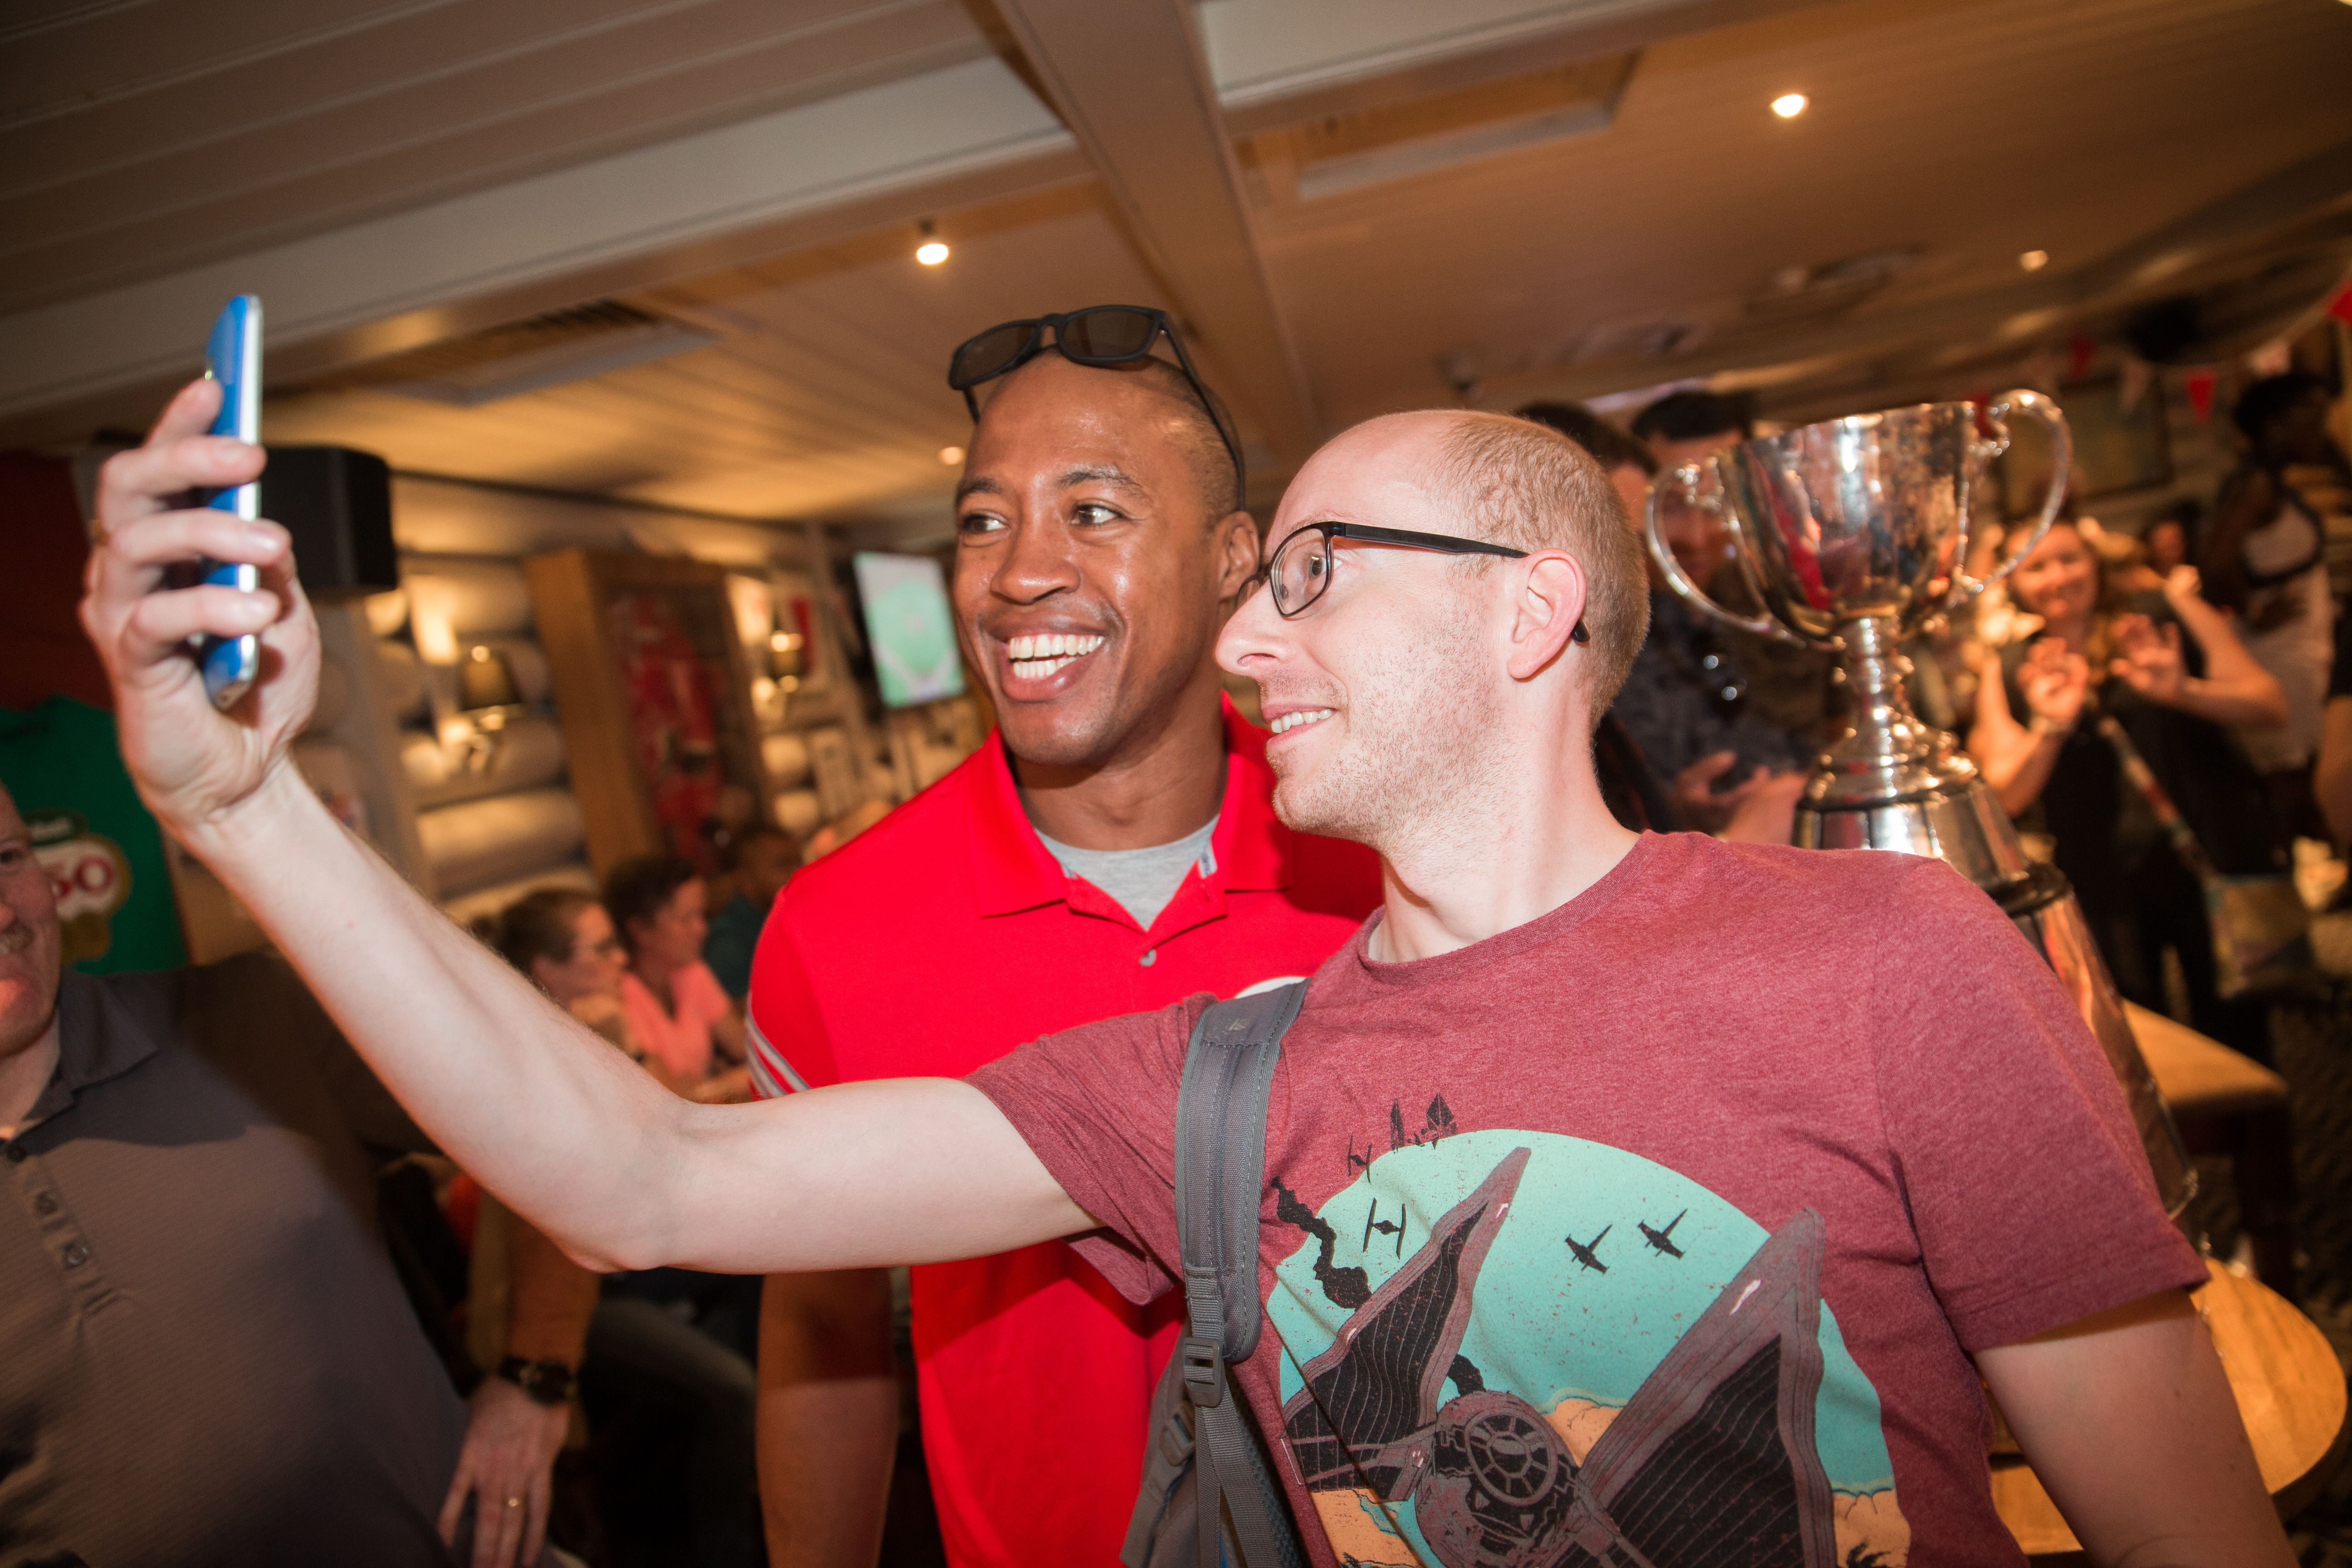 Henry Burris and fans pose for a photo with the Grey Cup inside the Maple Leaf Pub in central London on June 30, 2017. (Photo by Jim Ross/CFL)